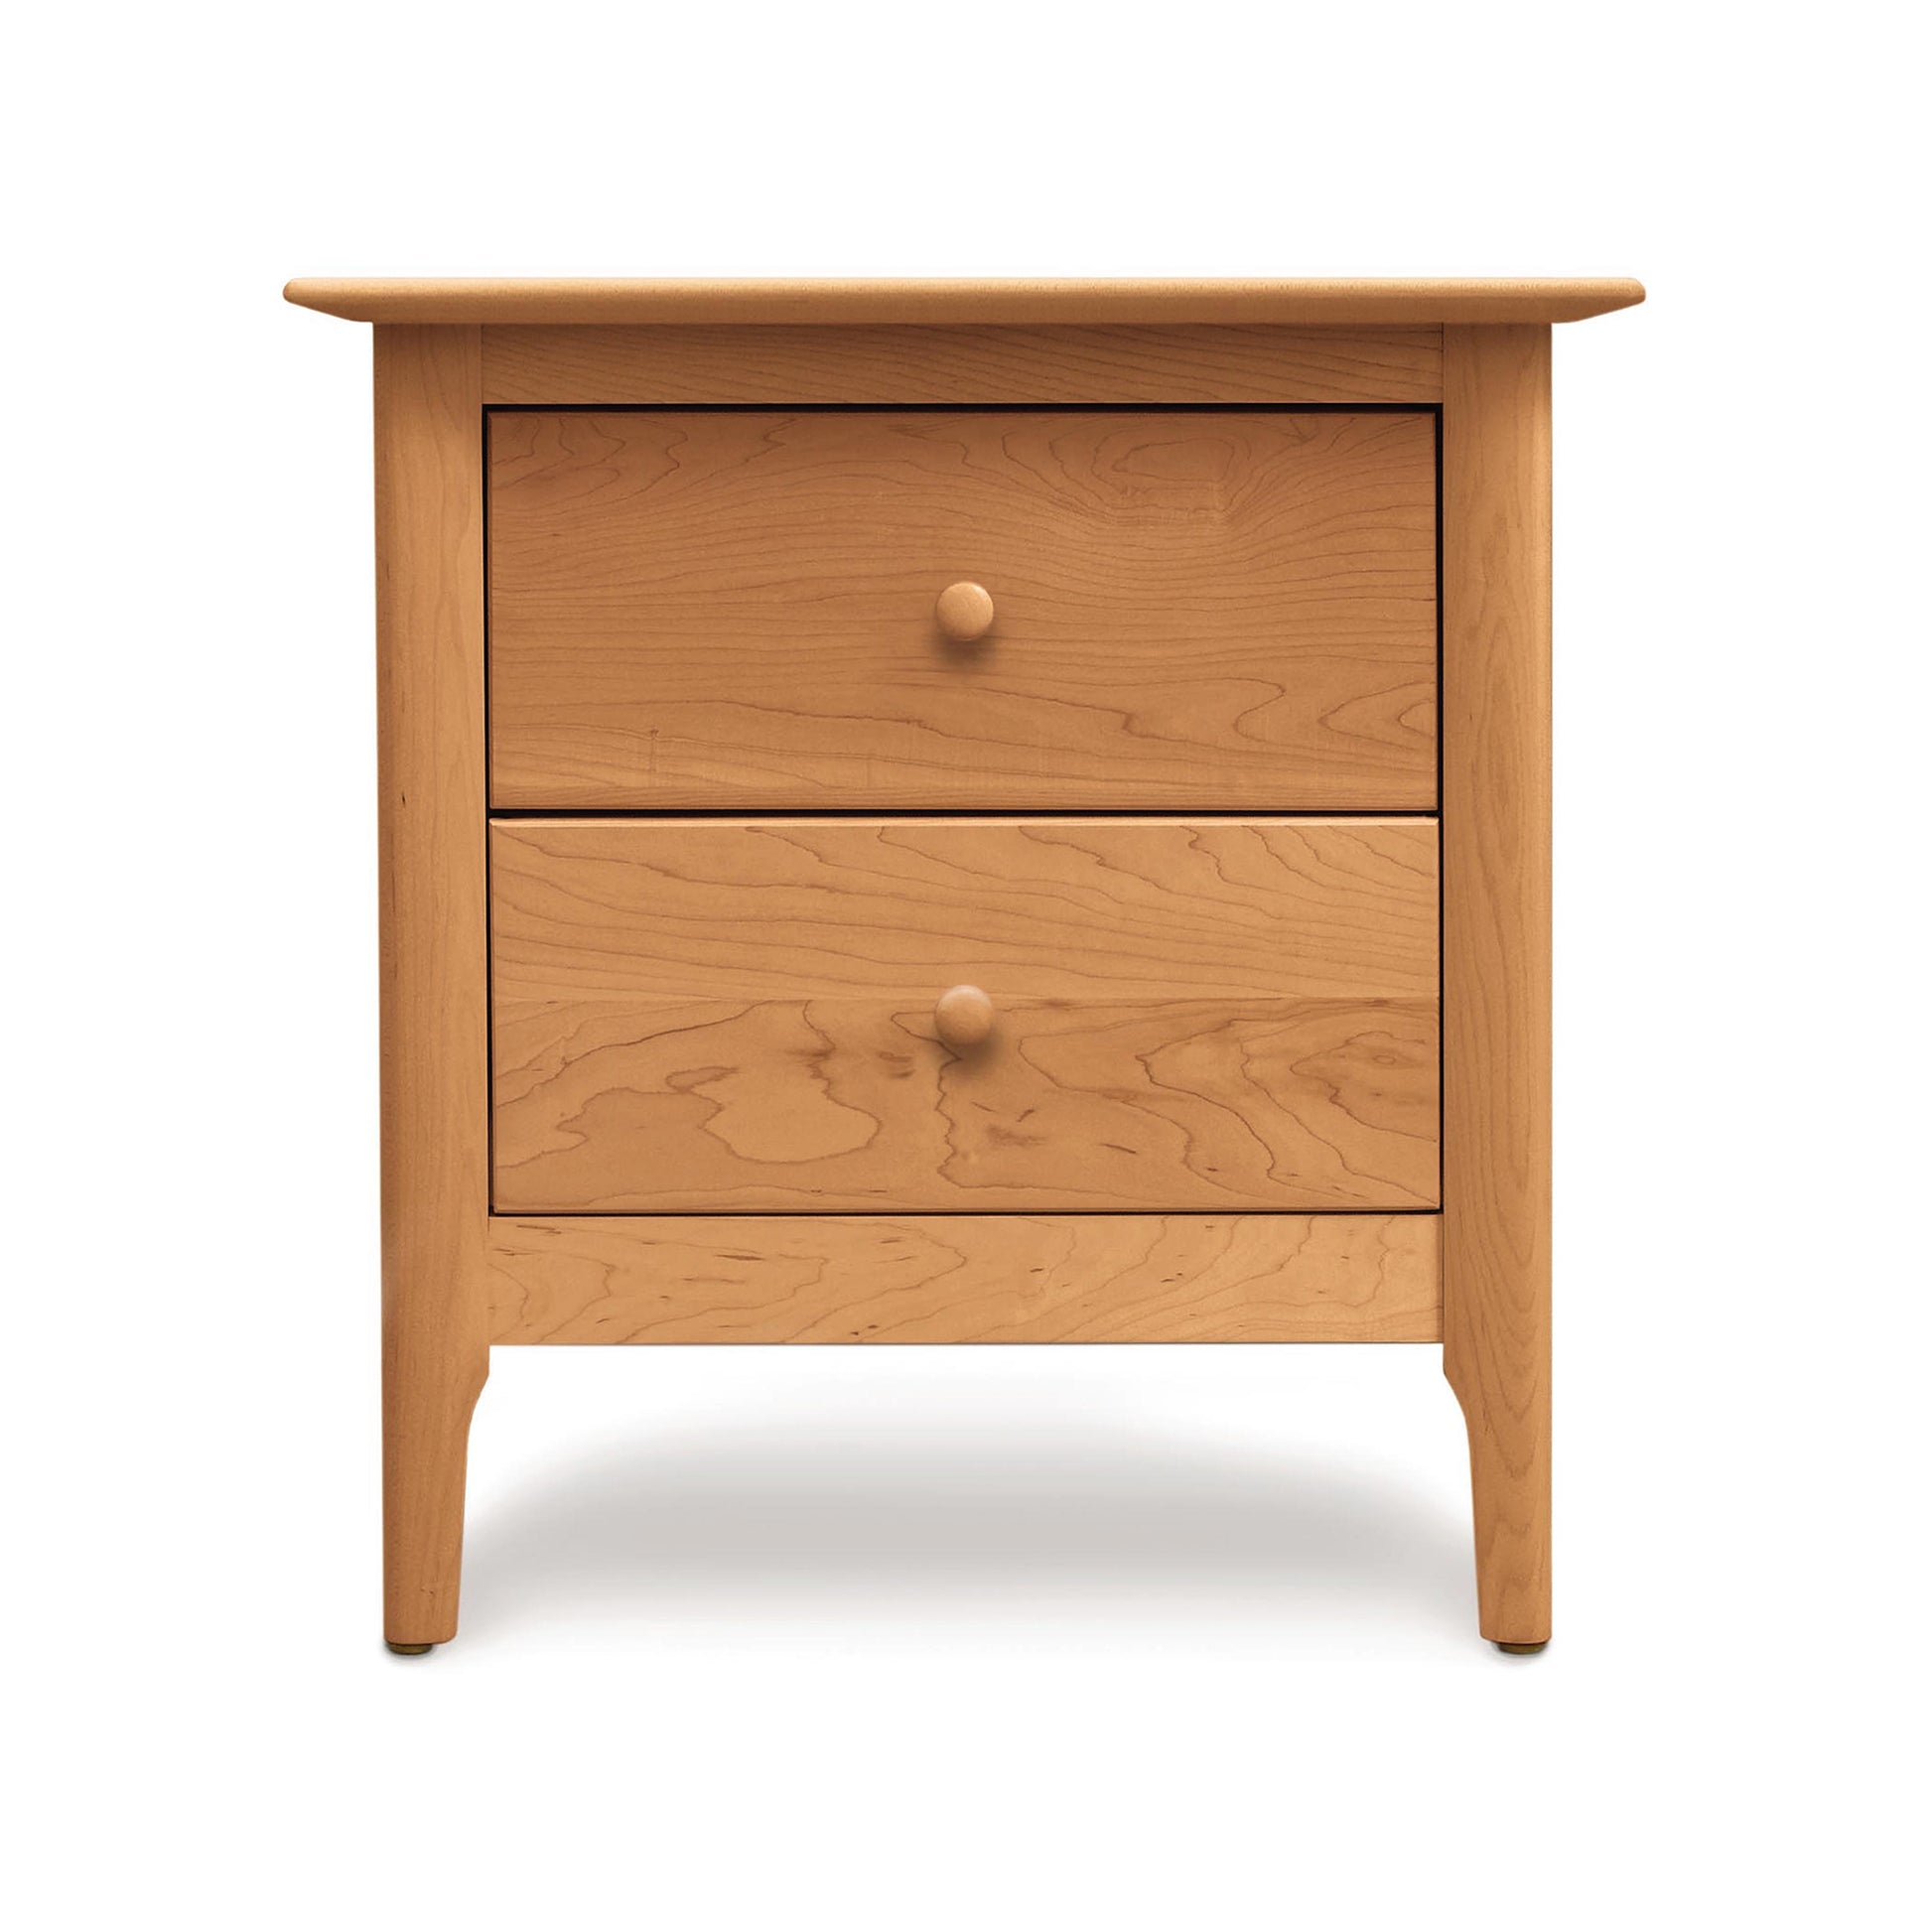 The Sarah 2-Drawer Nightstand from the Copeland Furniture is a handmade piece crafted in Vermont. It features two drawers and is showcased against a sleek white background.